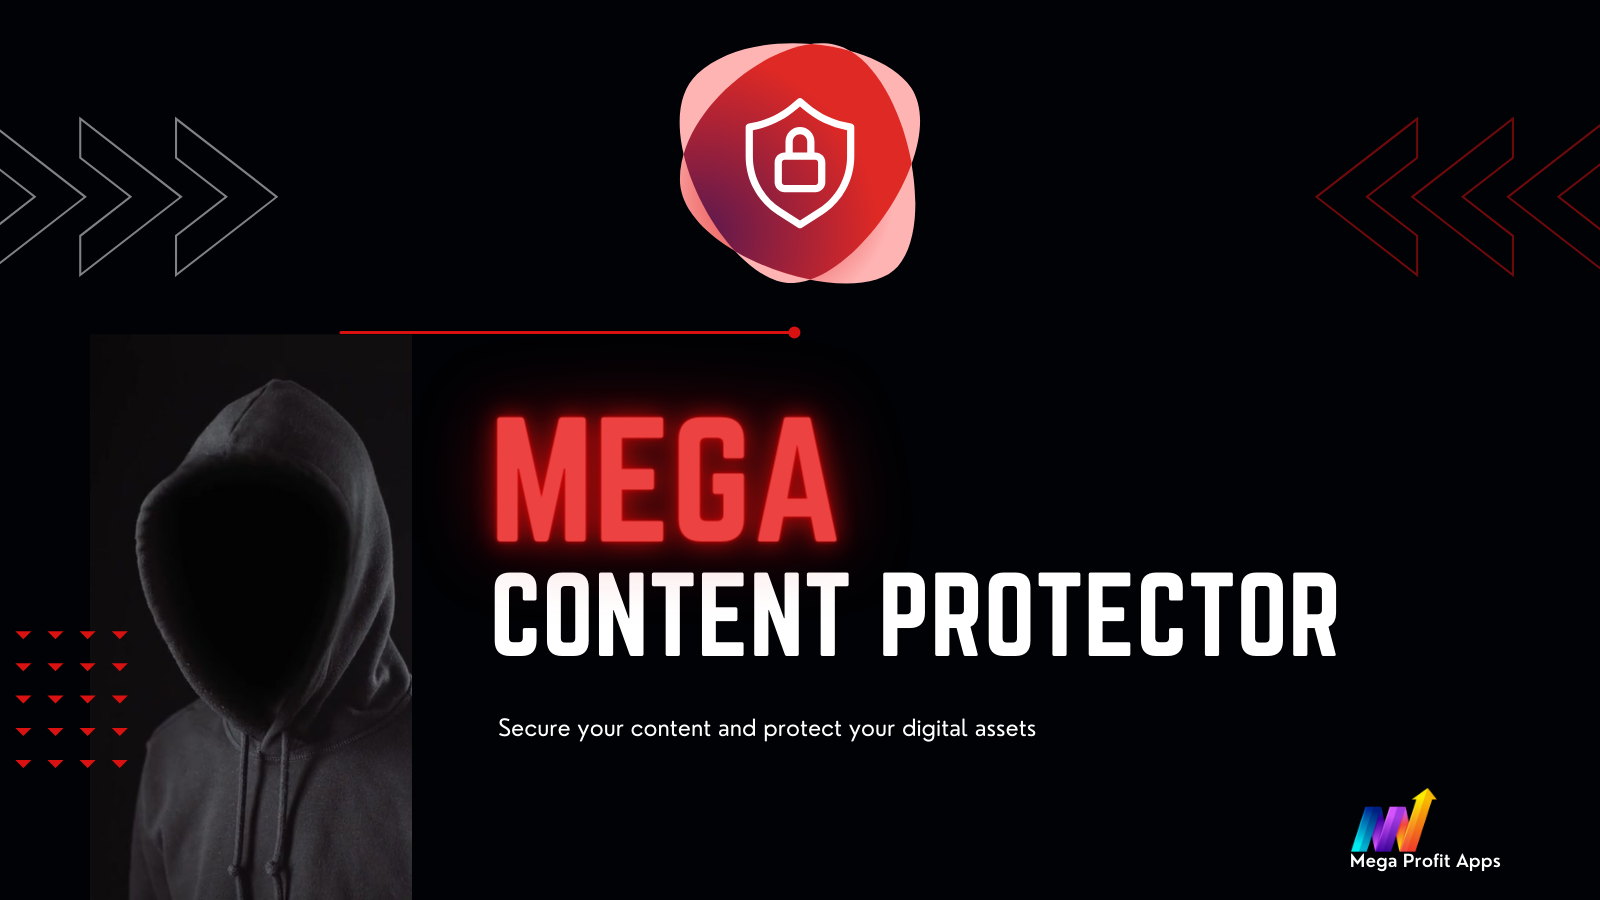 Mega Content Protector - Protect your hard work and creativity